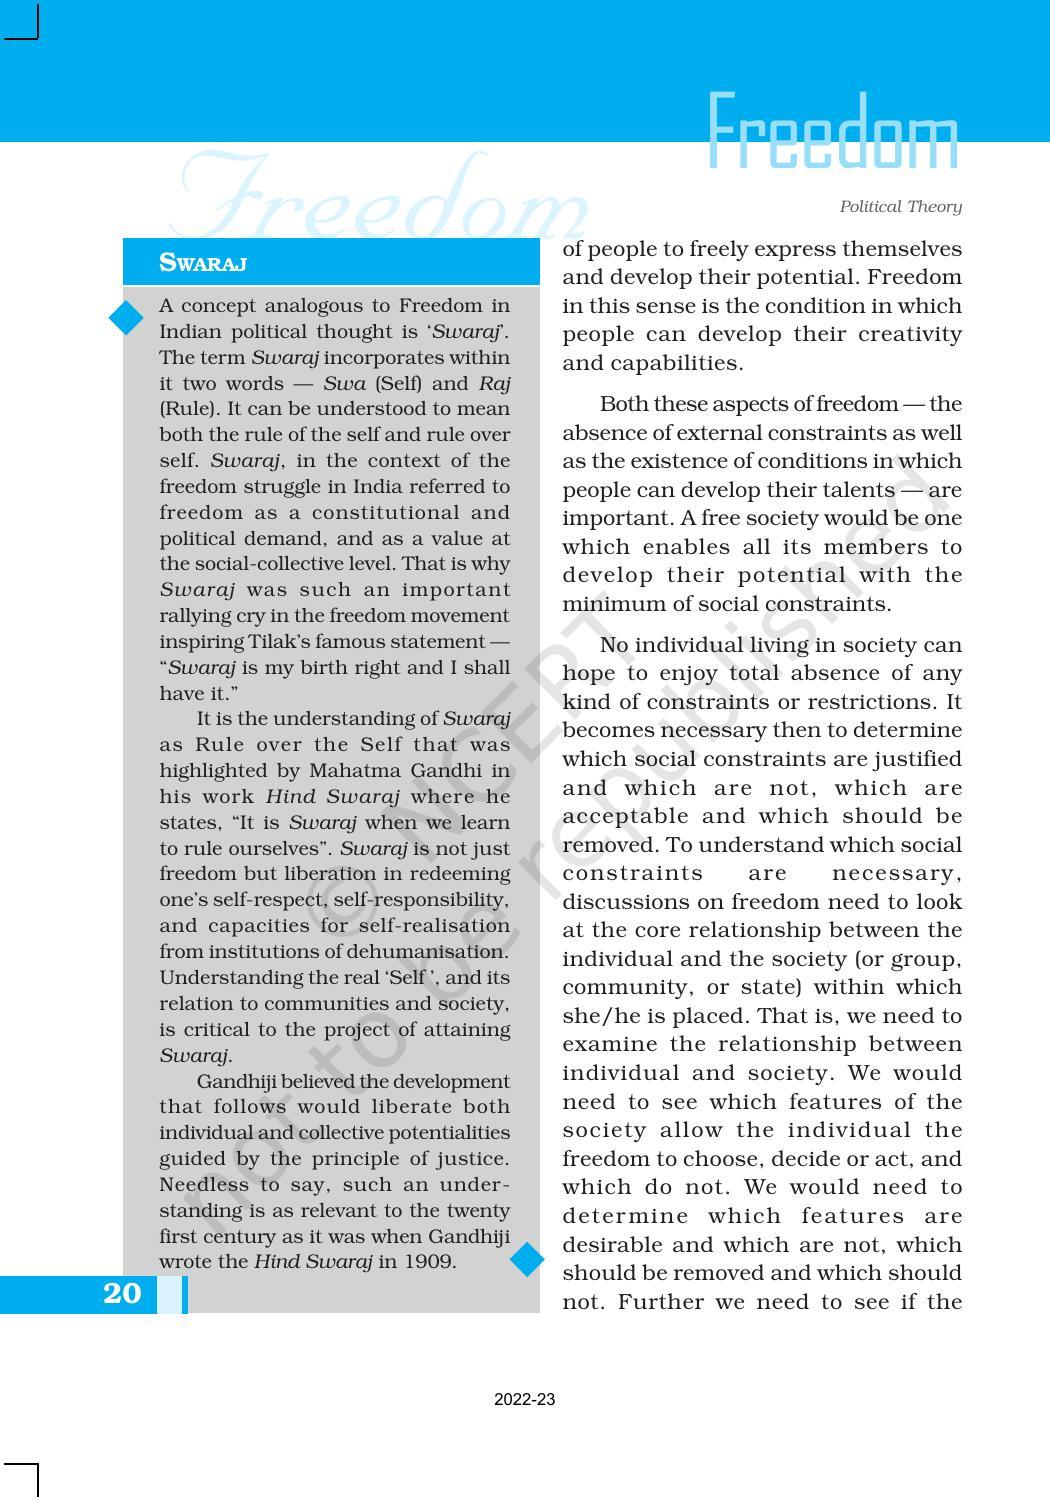 NCERT Book for Class 11 Political Science (Political Theory) Chapter 2 Freedom - Page 4